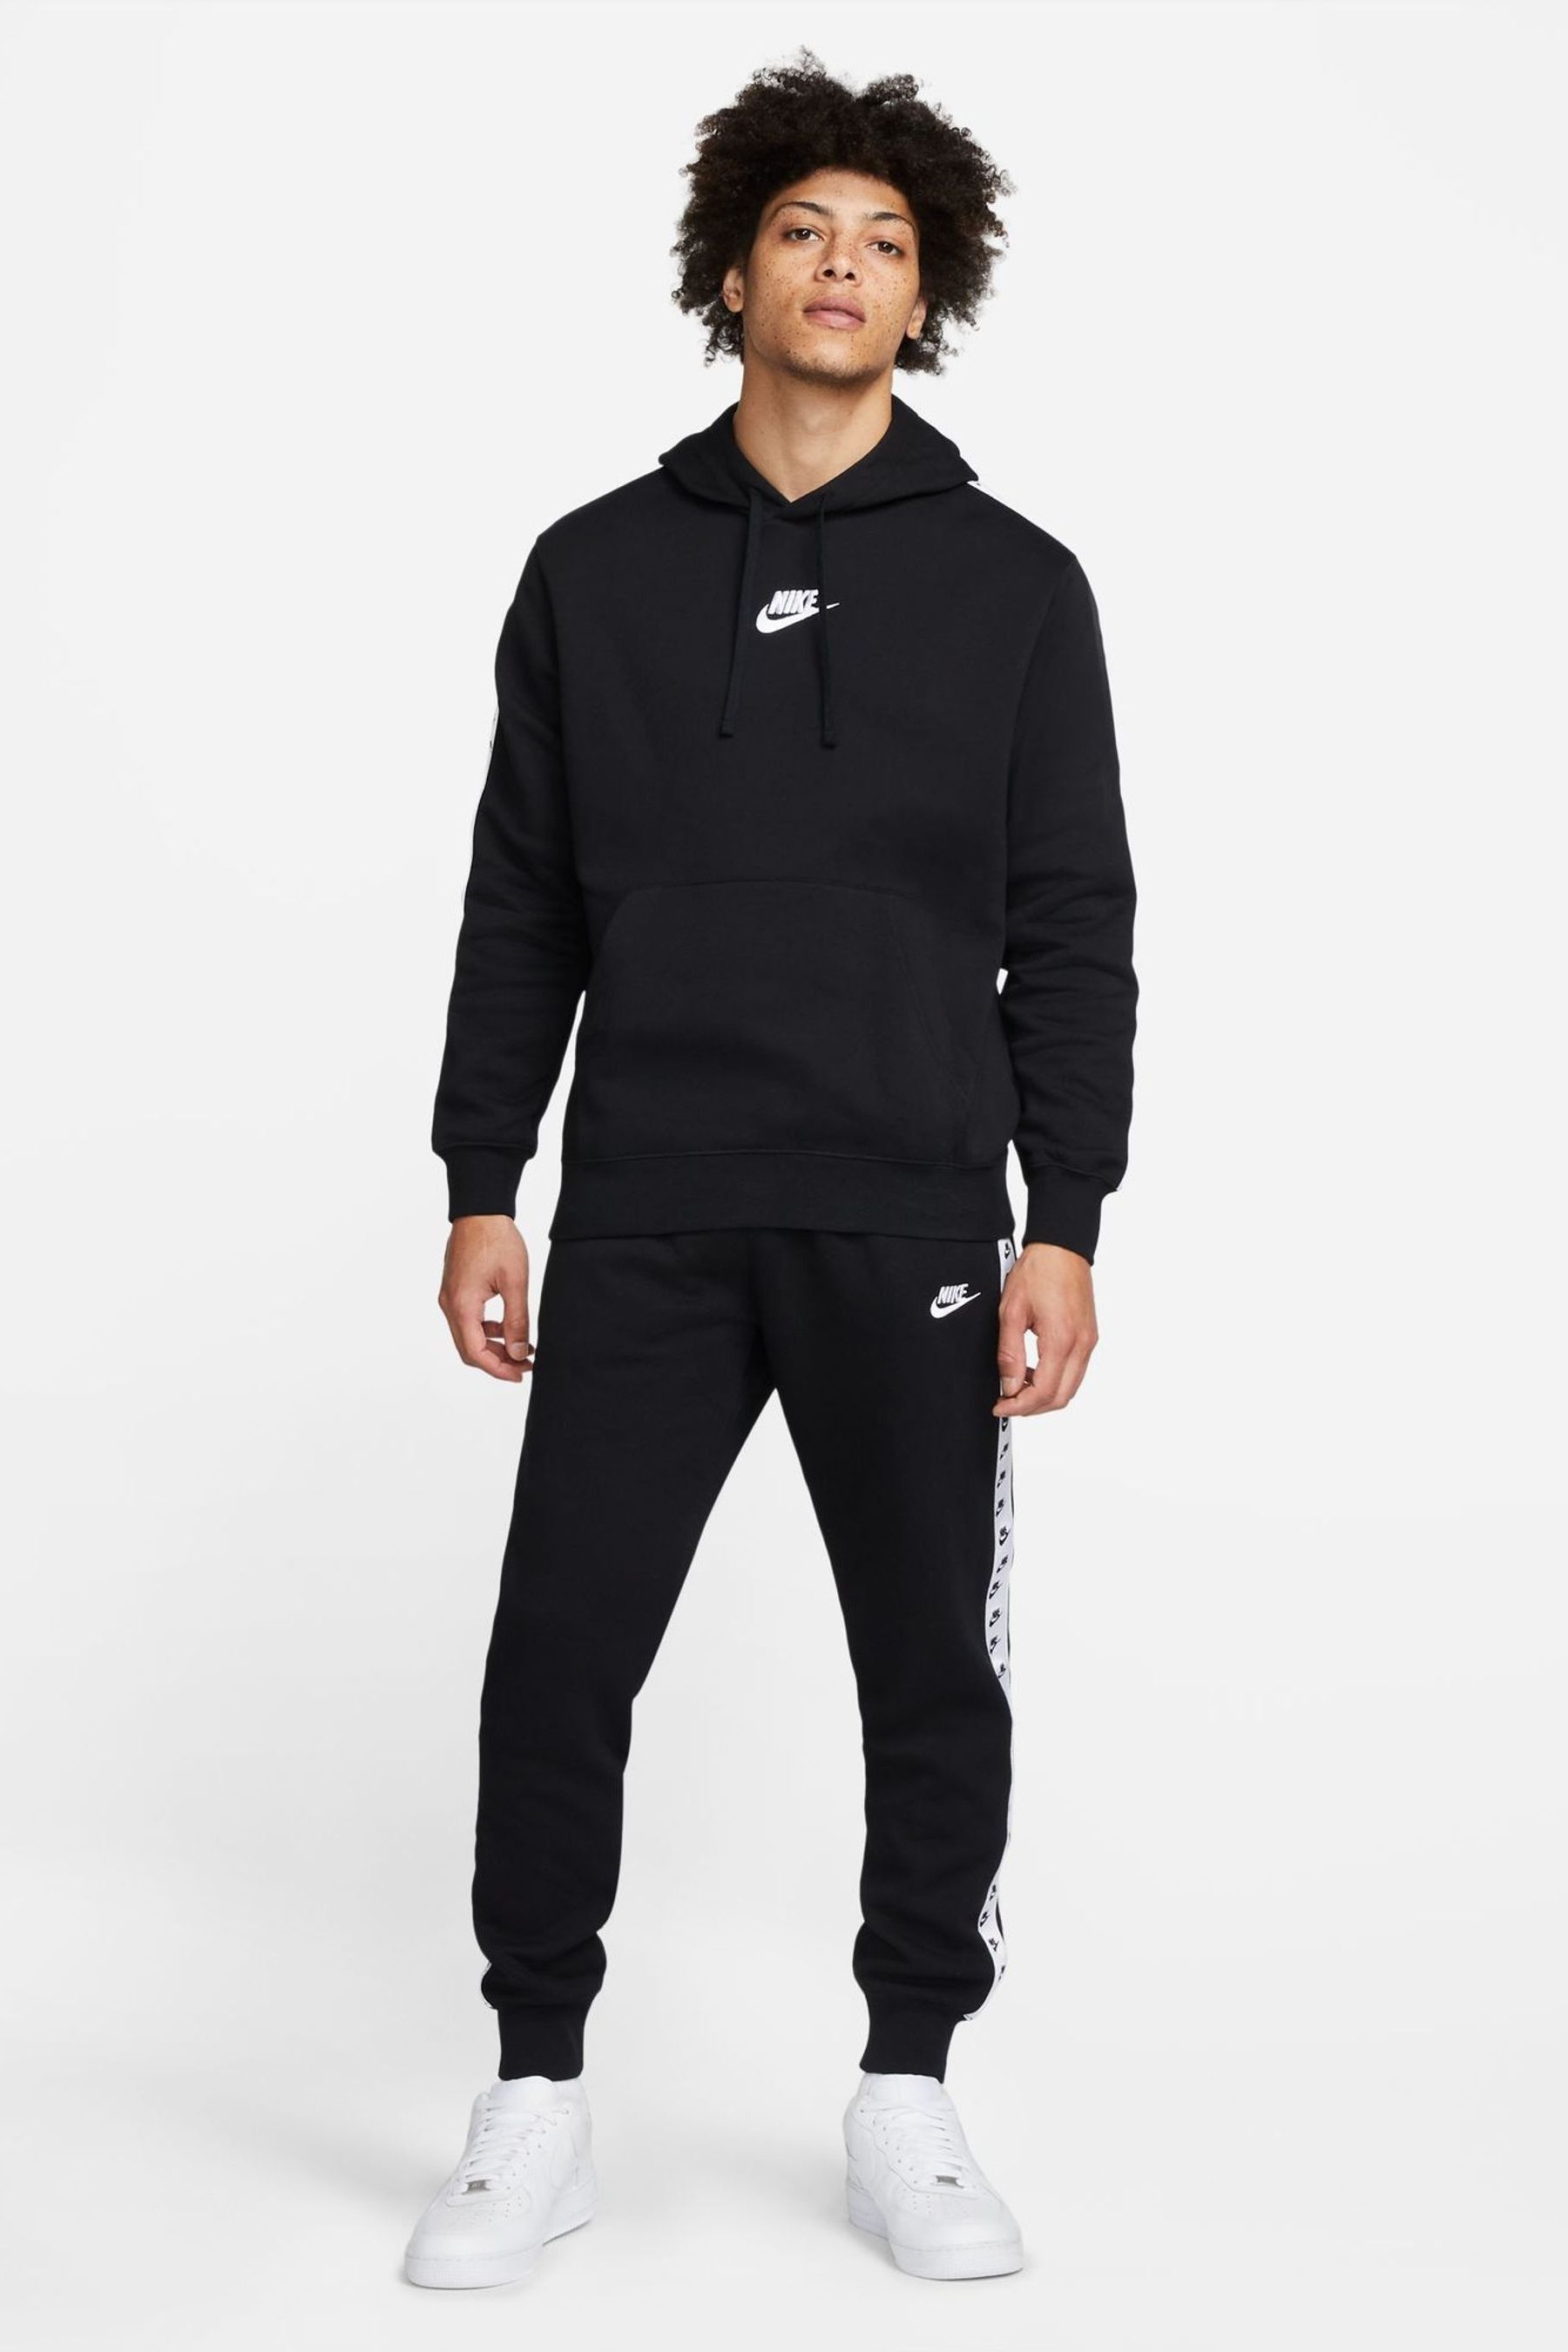 Buy Nike Sportswear Essential Hooded Tracksuit from the Next UK online shop